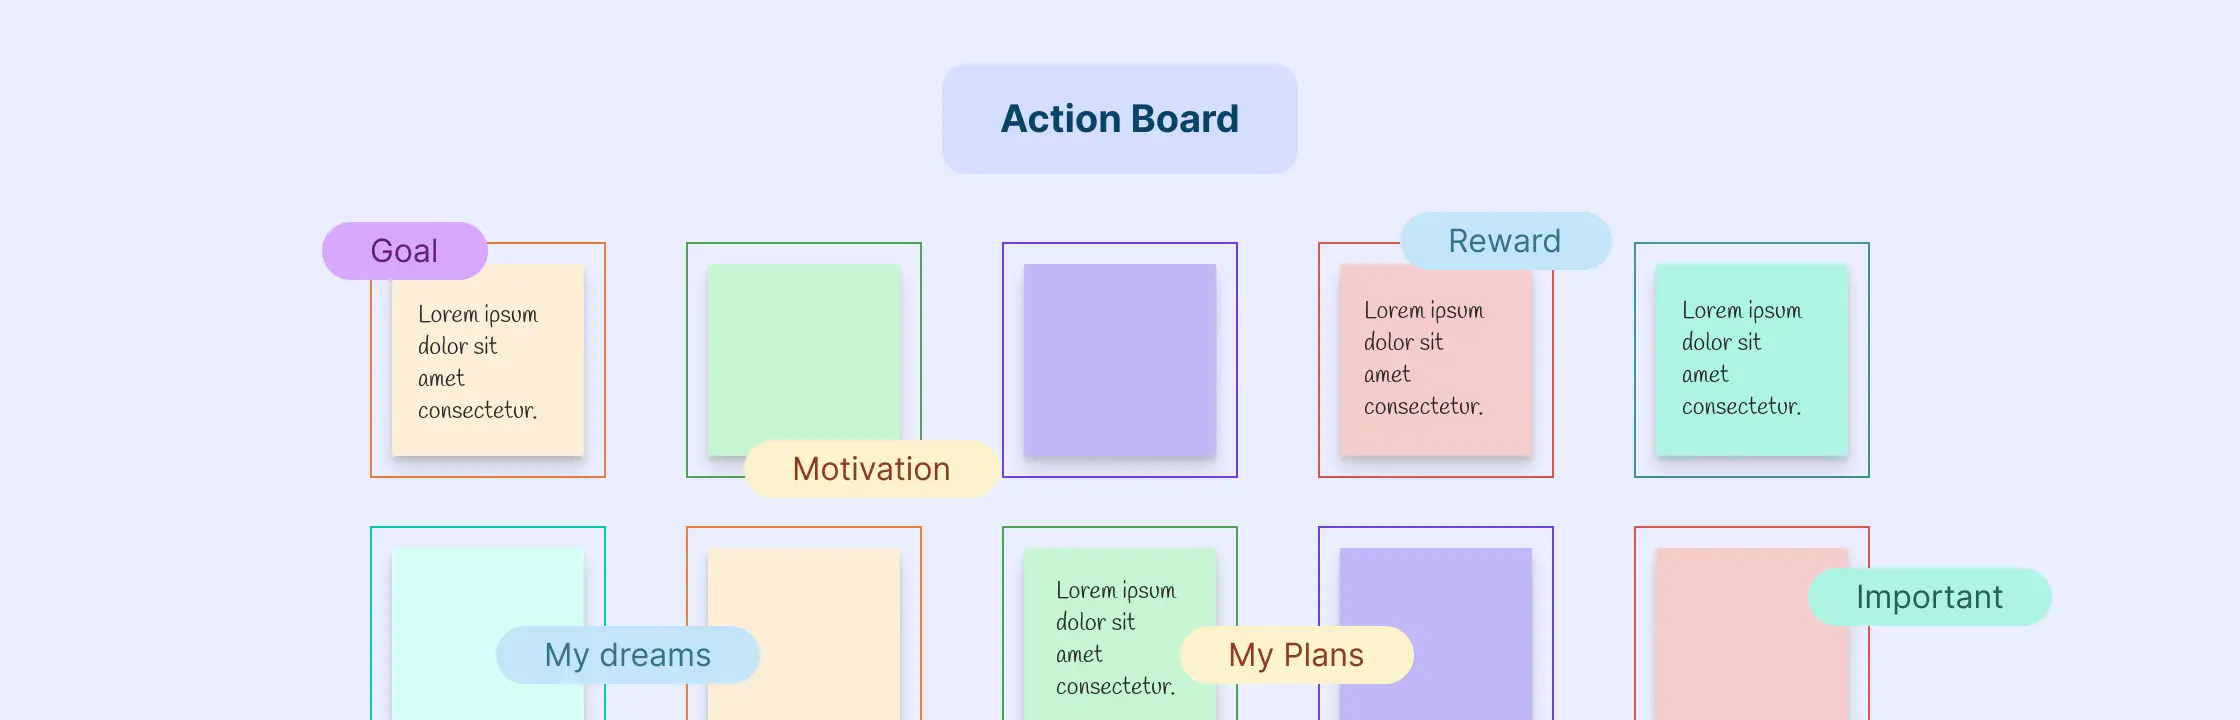 How to Create an Action Board: Step-by-Step Guide with Templates